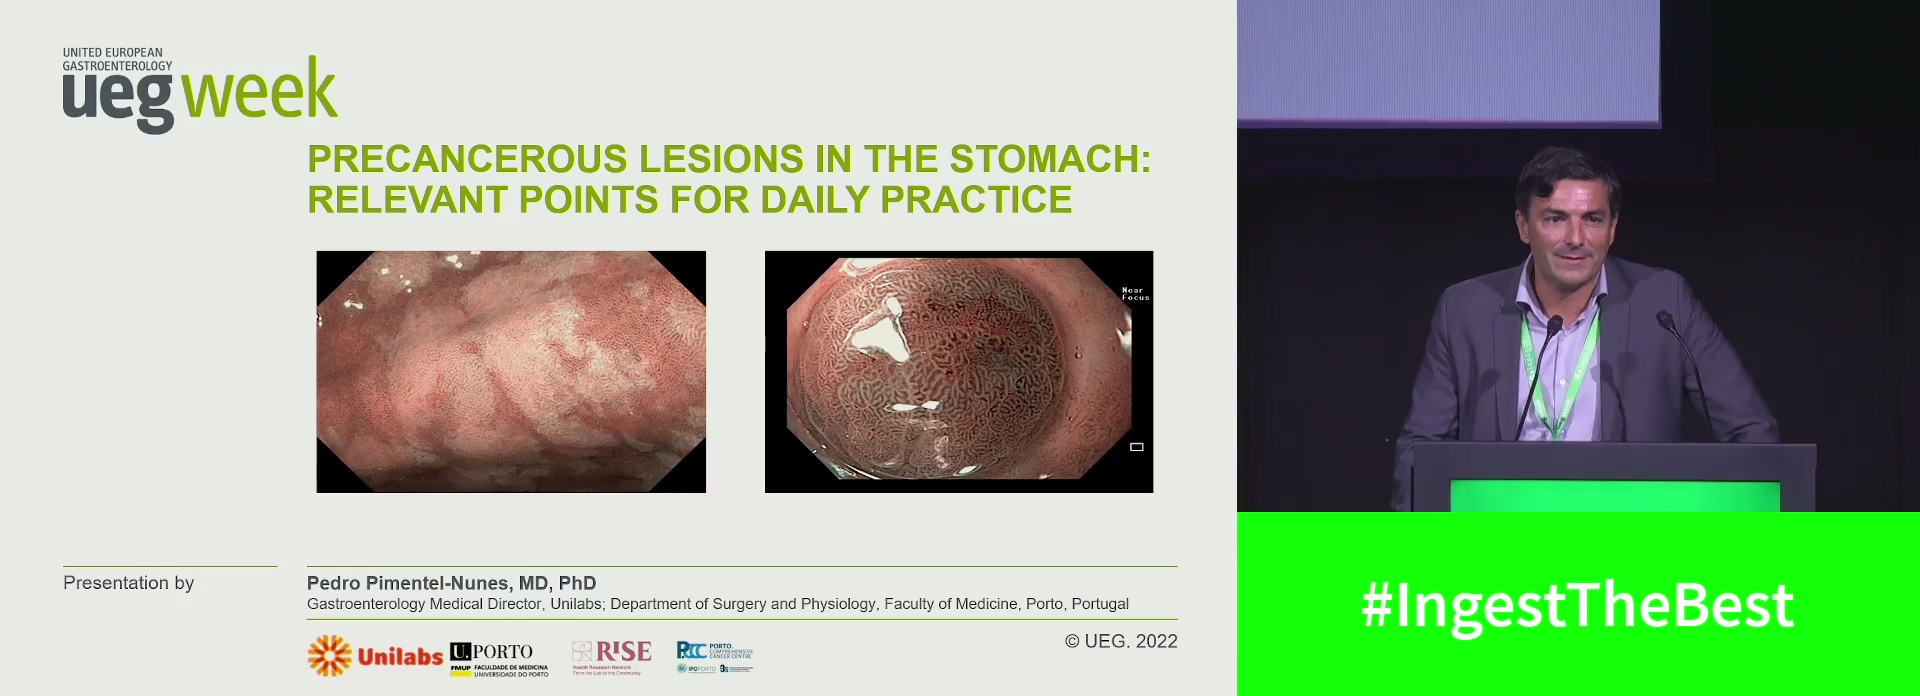 Precancerous lesions in the stomach: Relevant points for daily practice